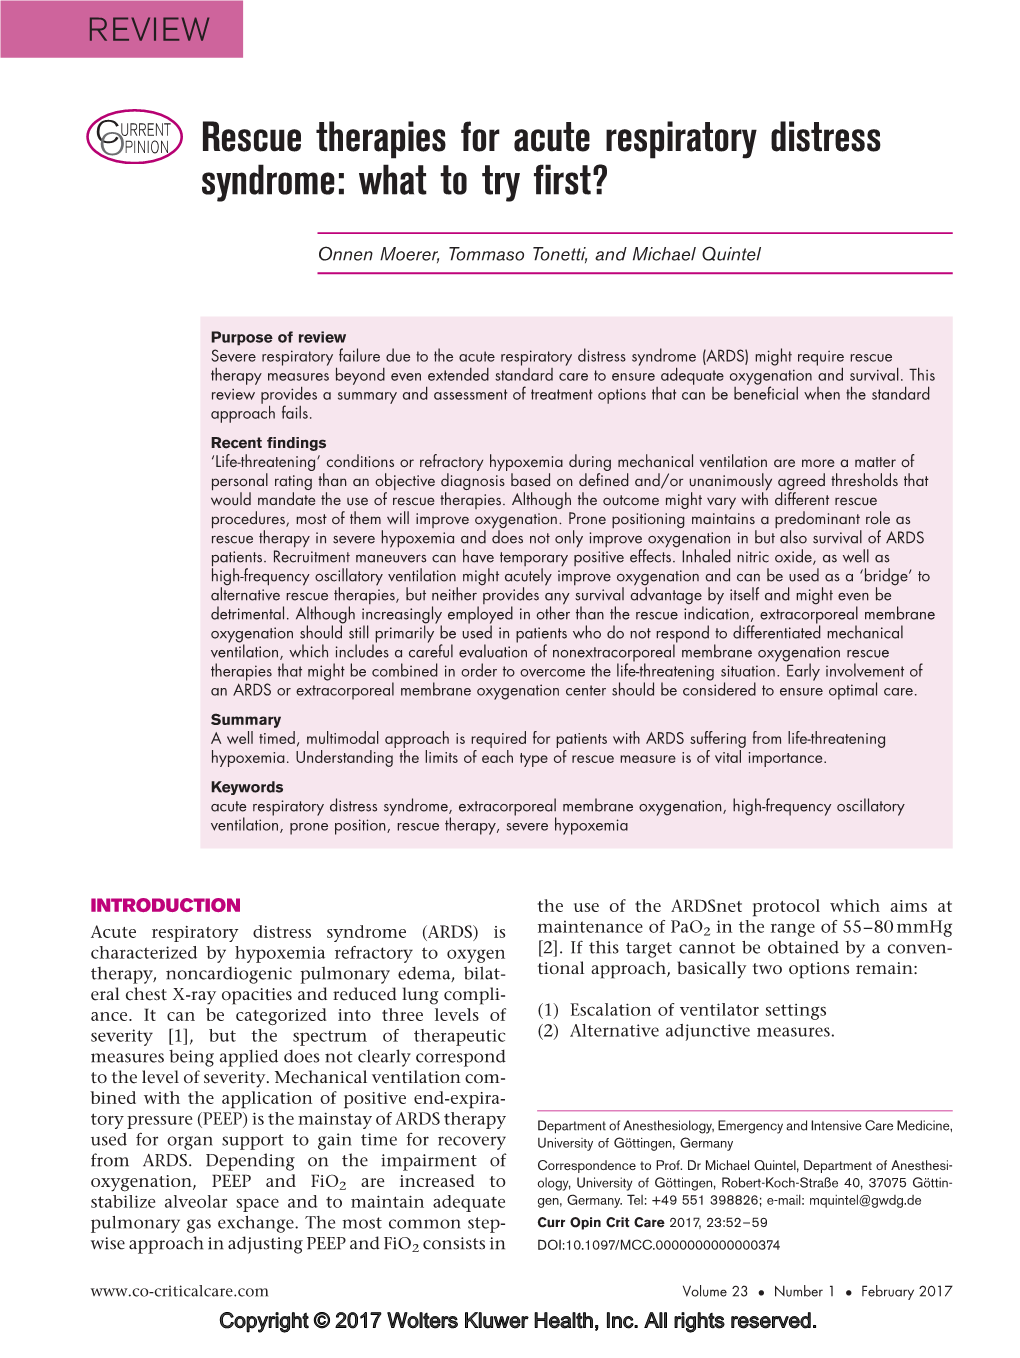 Rescue Therapies for Acute Respiratory Distress Syndrome: What to Try First?